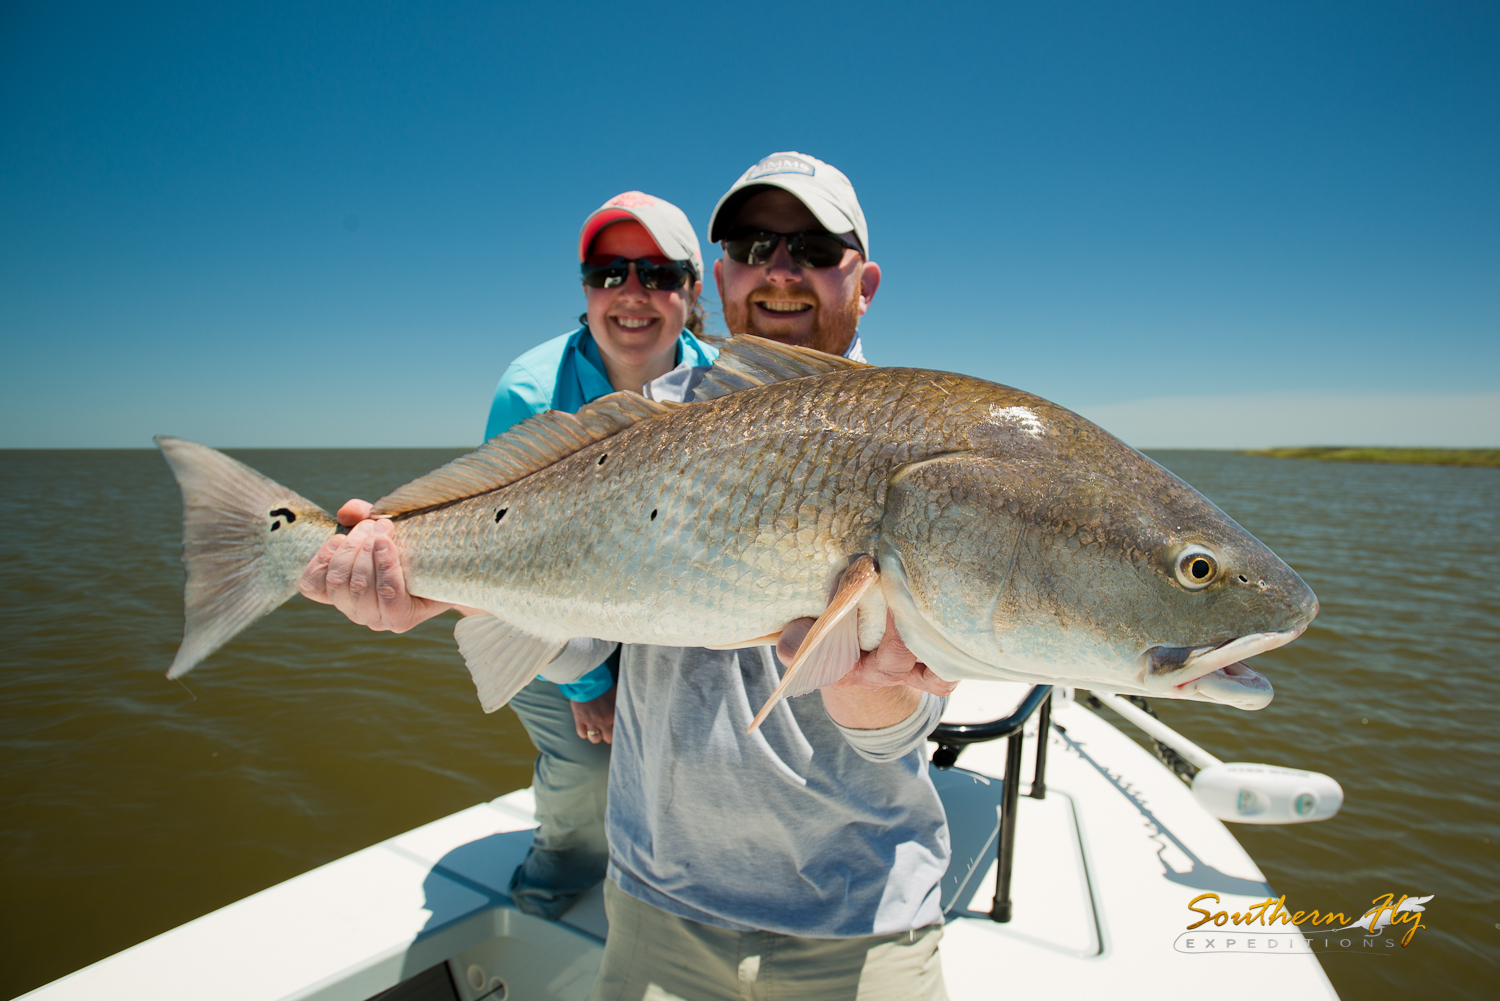 Couple Weekend Fly Fishing Trip New Orleans